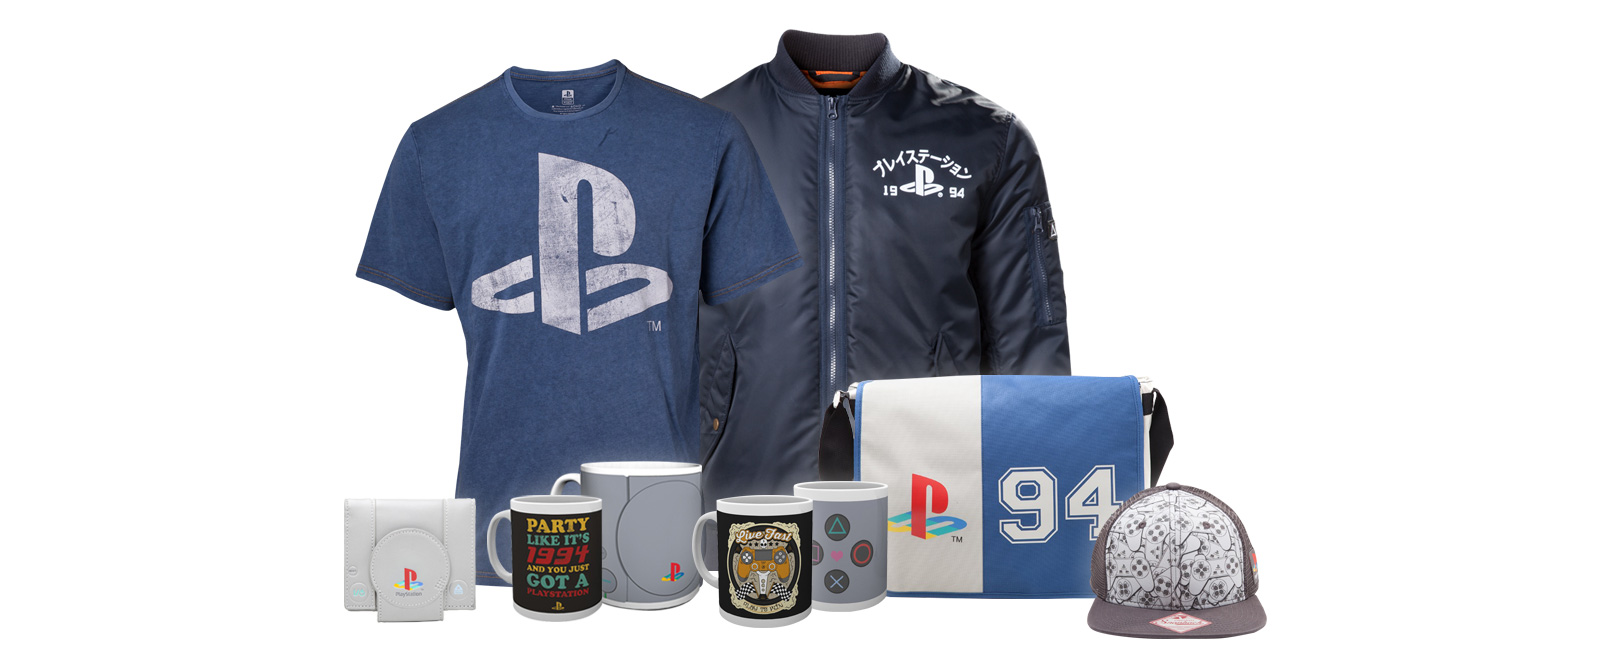 Officially licensed PlayStation Jacket - Insert Coin Clothing